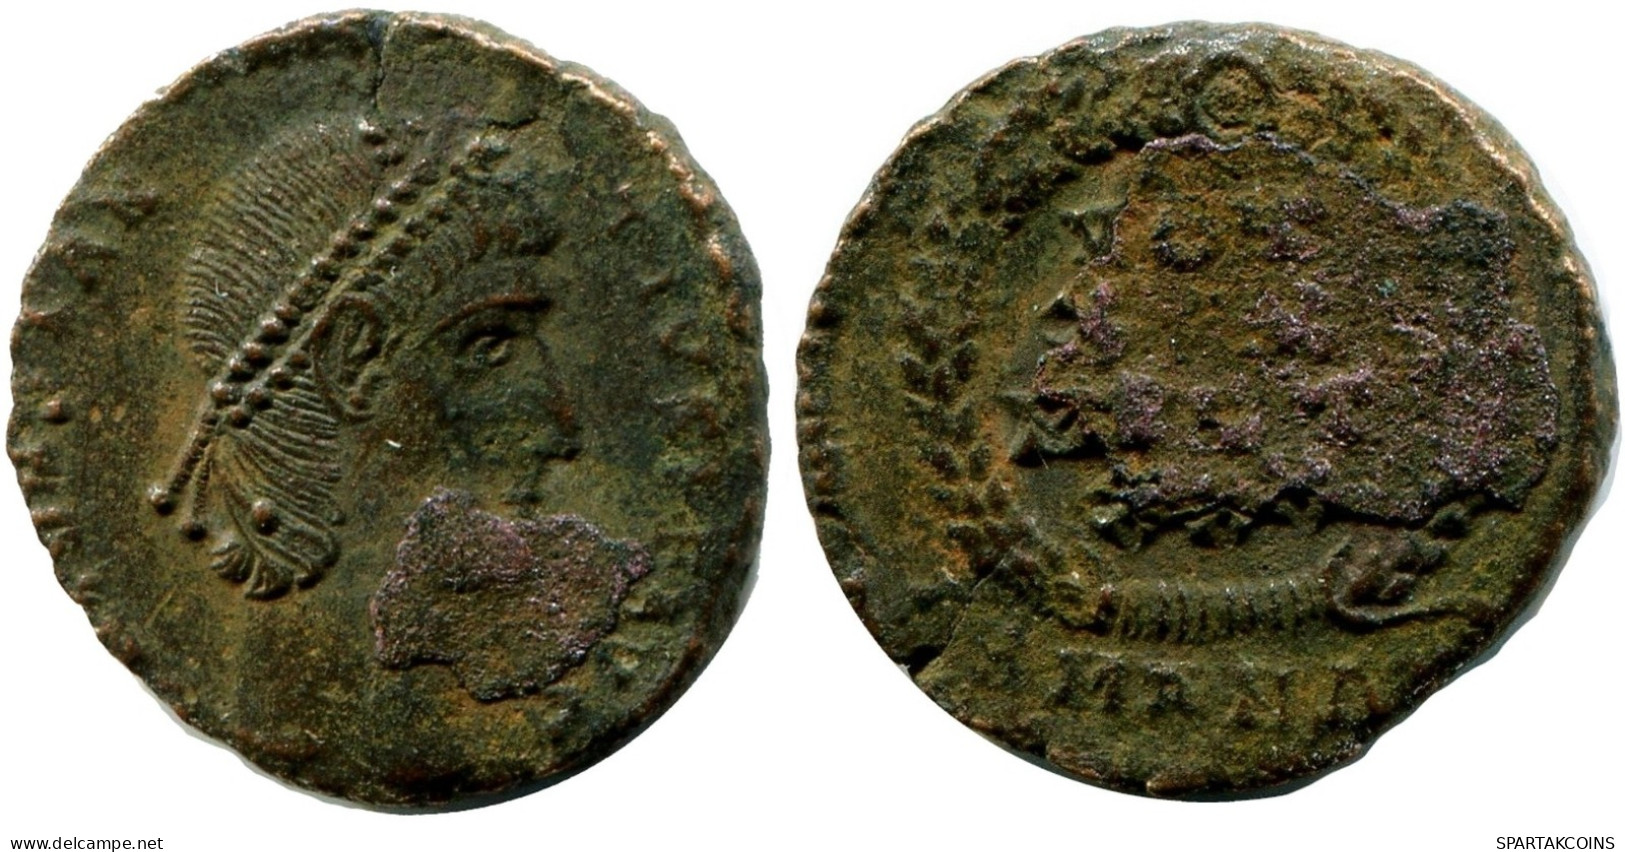 CONSTANTIUS II MINTED IN ANTIOCH FOUND IN IHNASYAH HOARD EGYPT #ANC11239.14.F.A - The Christian Empire (307 AD Tot 363 AD)